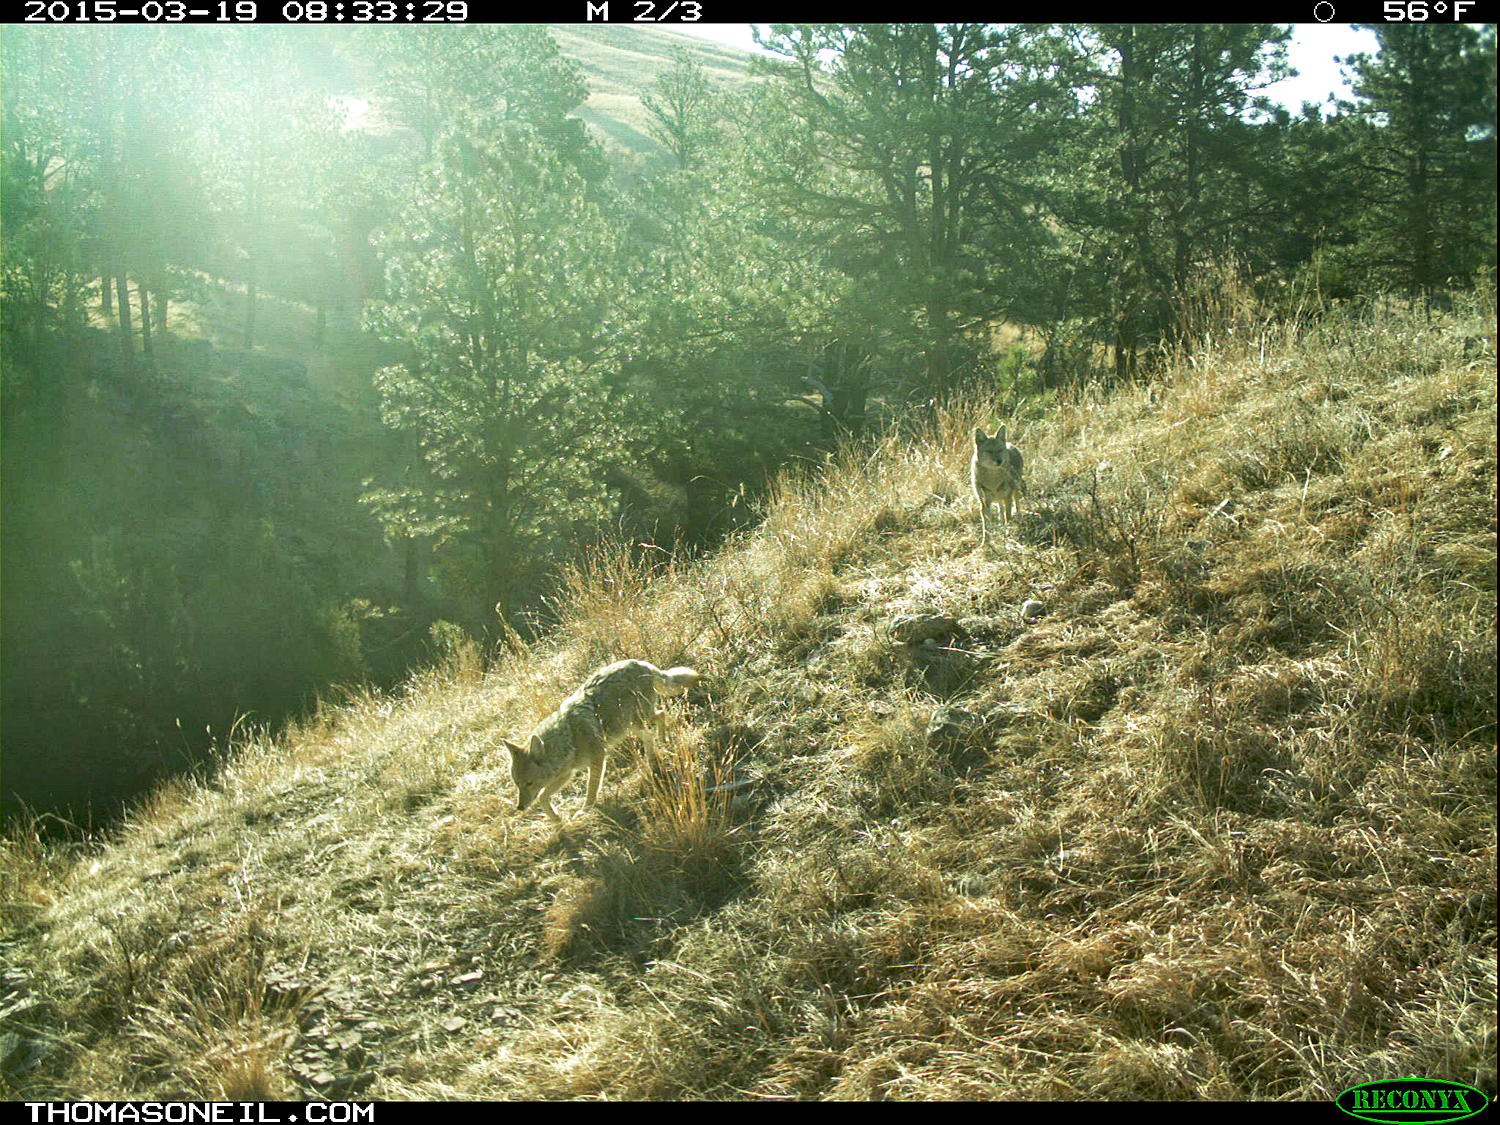 Two coyotes on trailcam, Wind Cave National Park, March 2015,   Click for next photo.